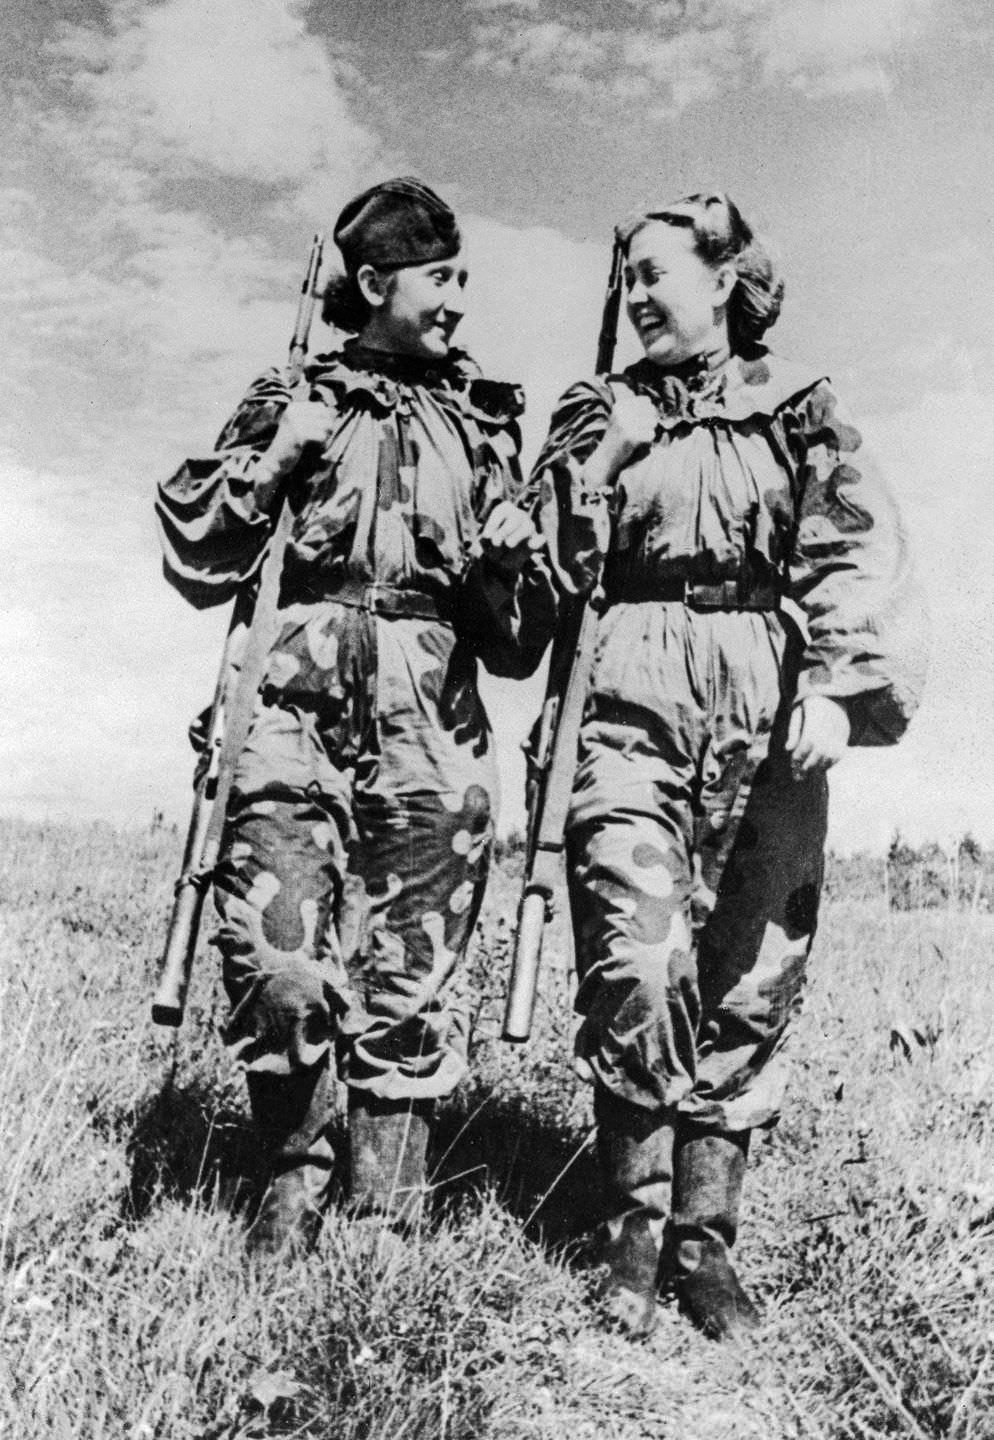 Snipers C. Bykova and R. Skrypnikova return from a combat assignment. Nov. 24, 1943